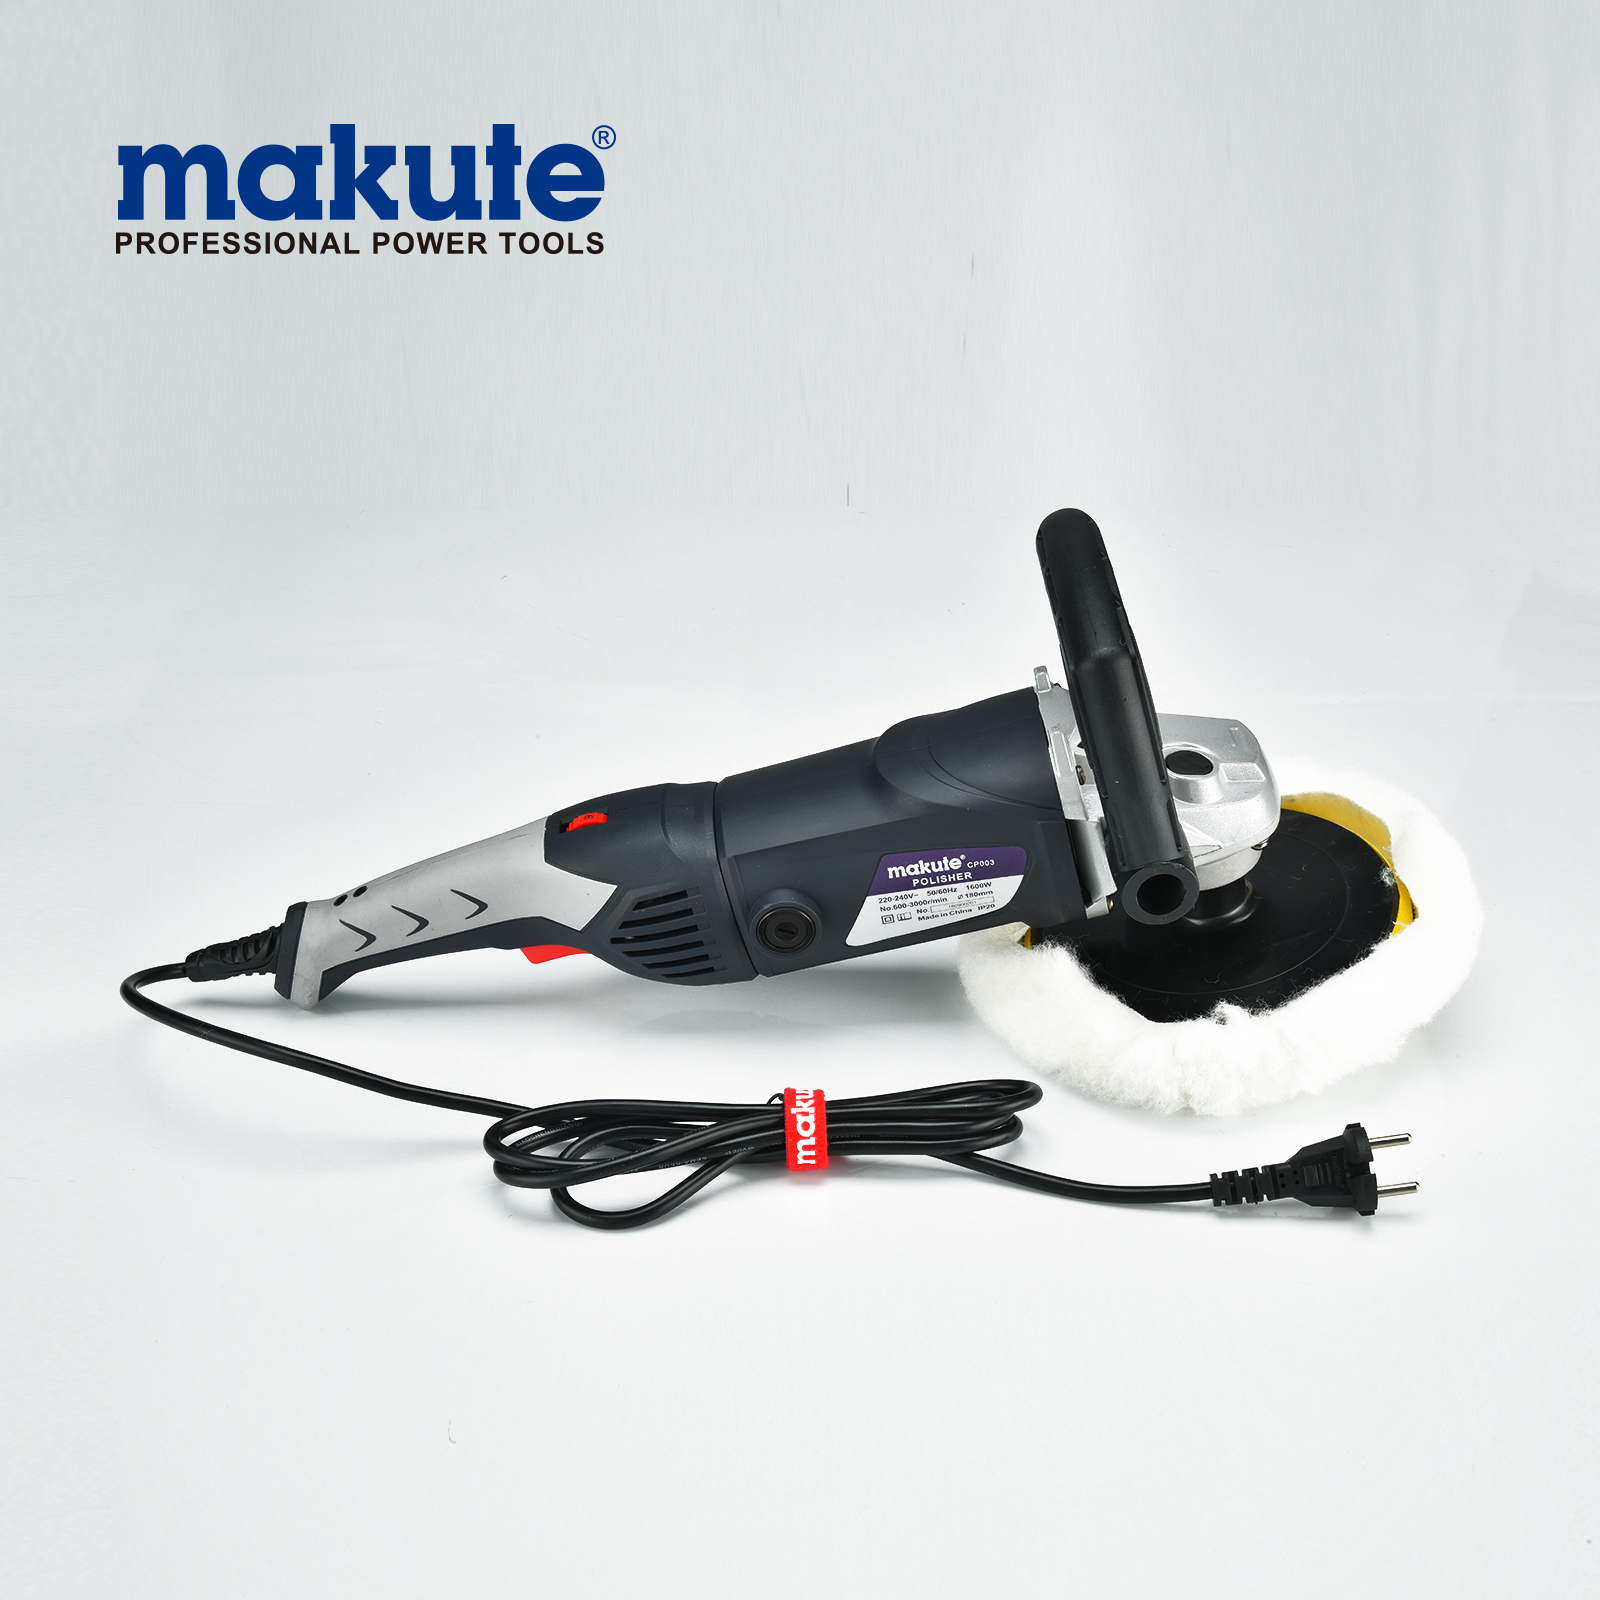 Makute 1600w electric power tool